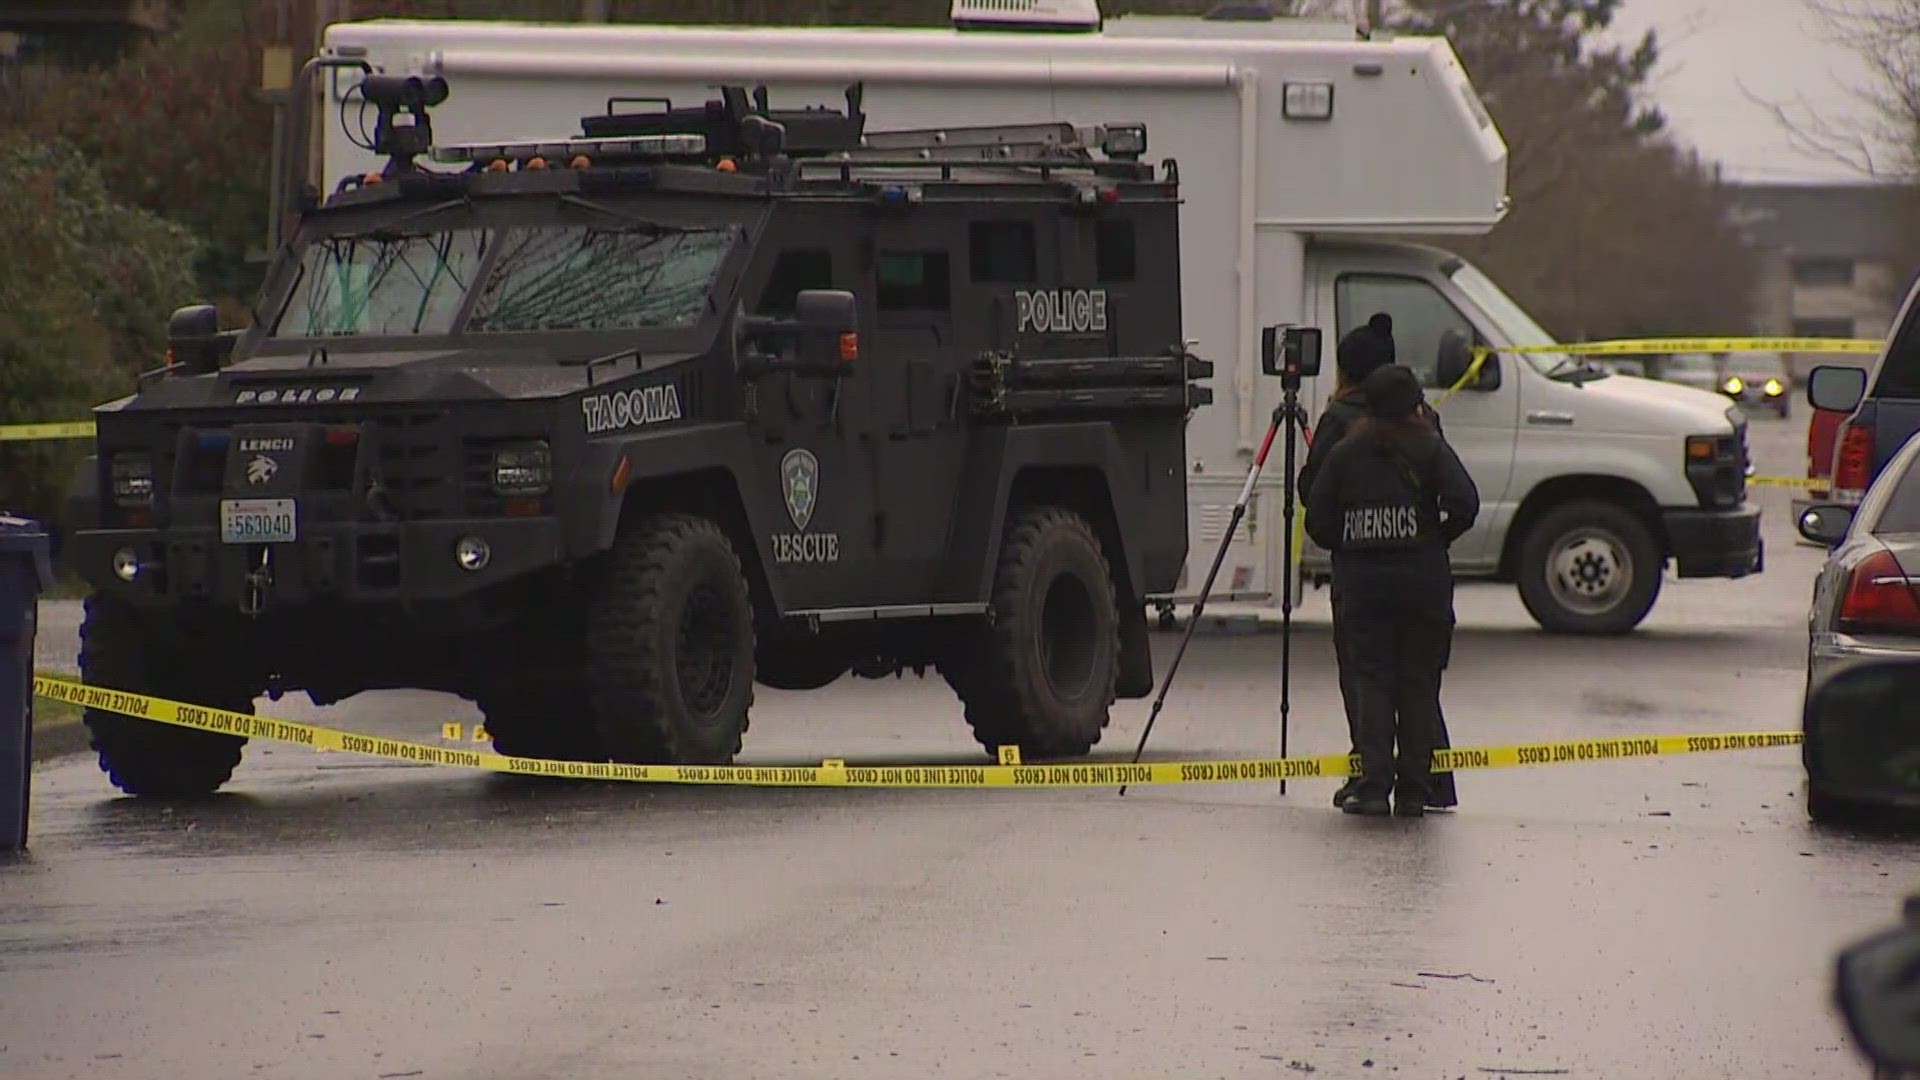 A female suspect who pointed a gun at her neighbor and police in Tacoma was shot and killed by SWAT team members. All officers were reported to be OK.